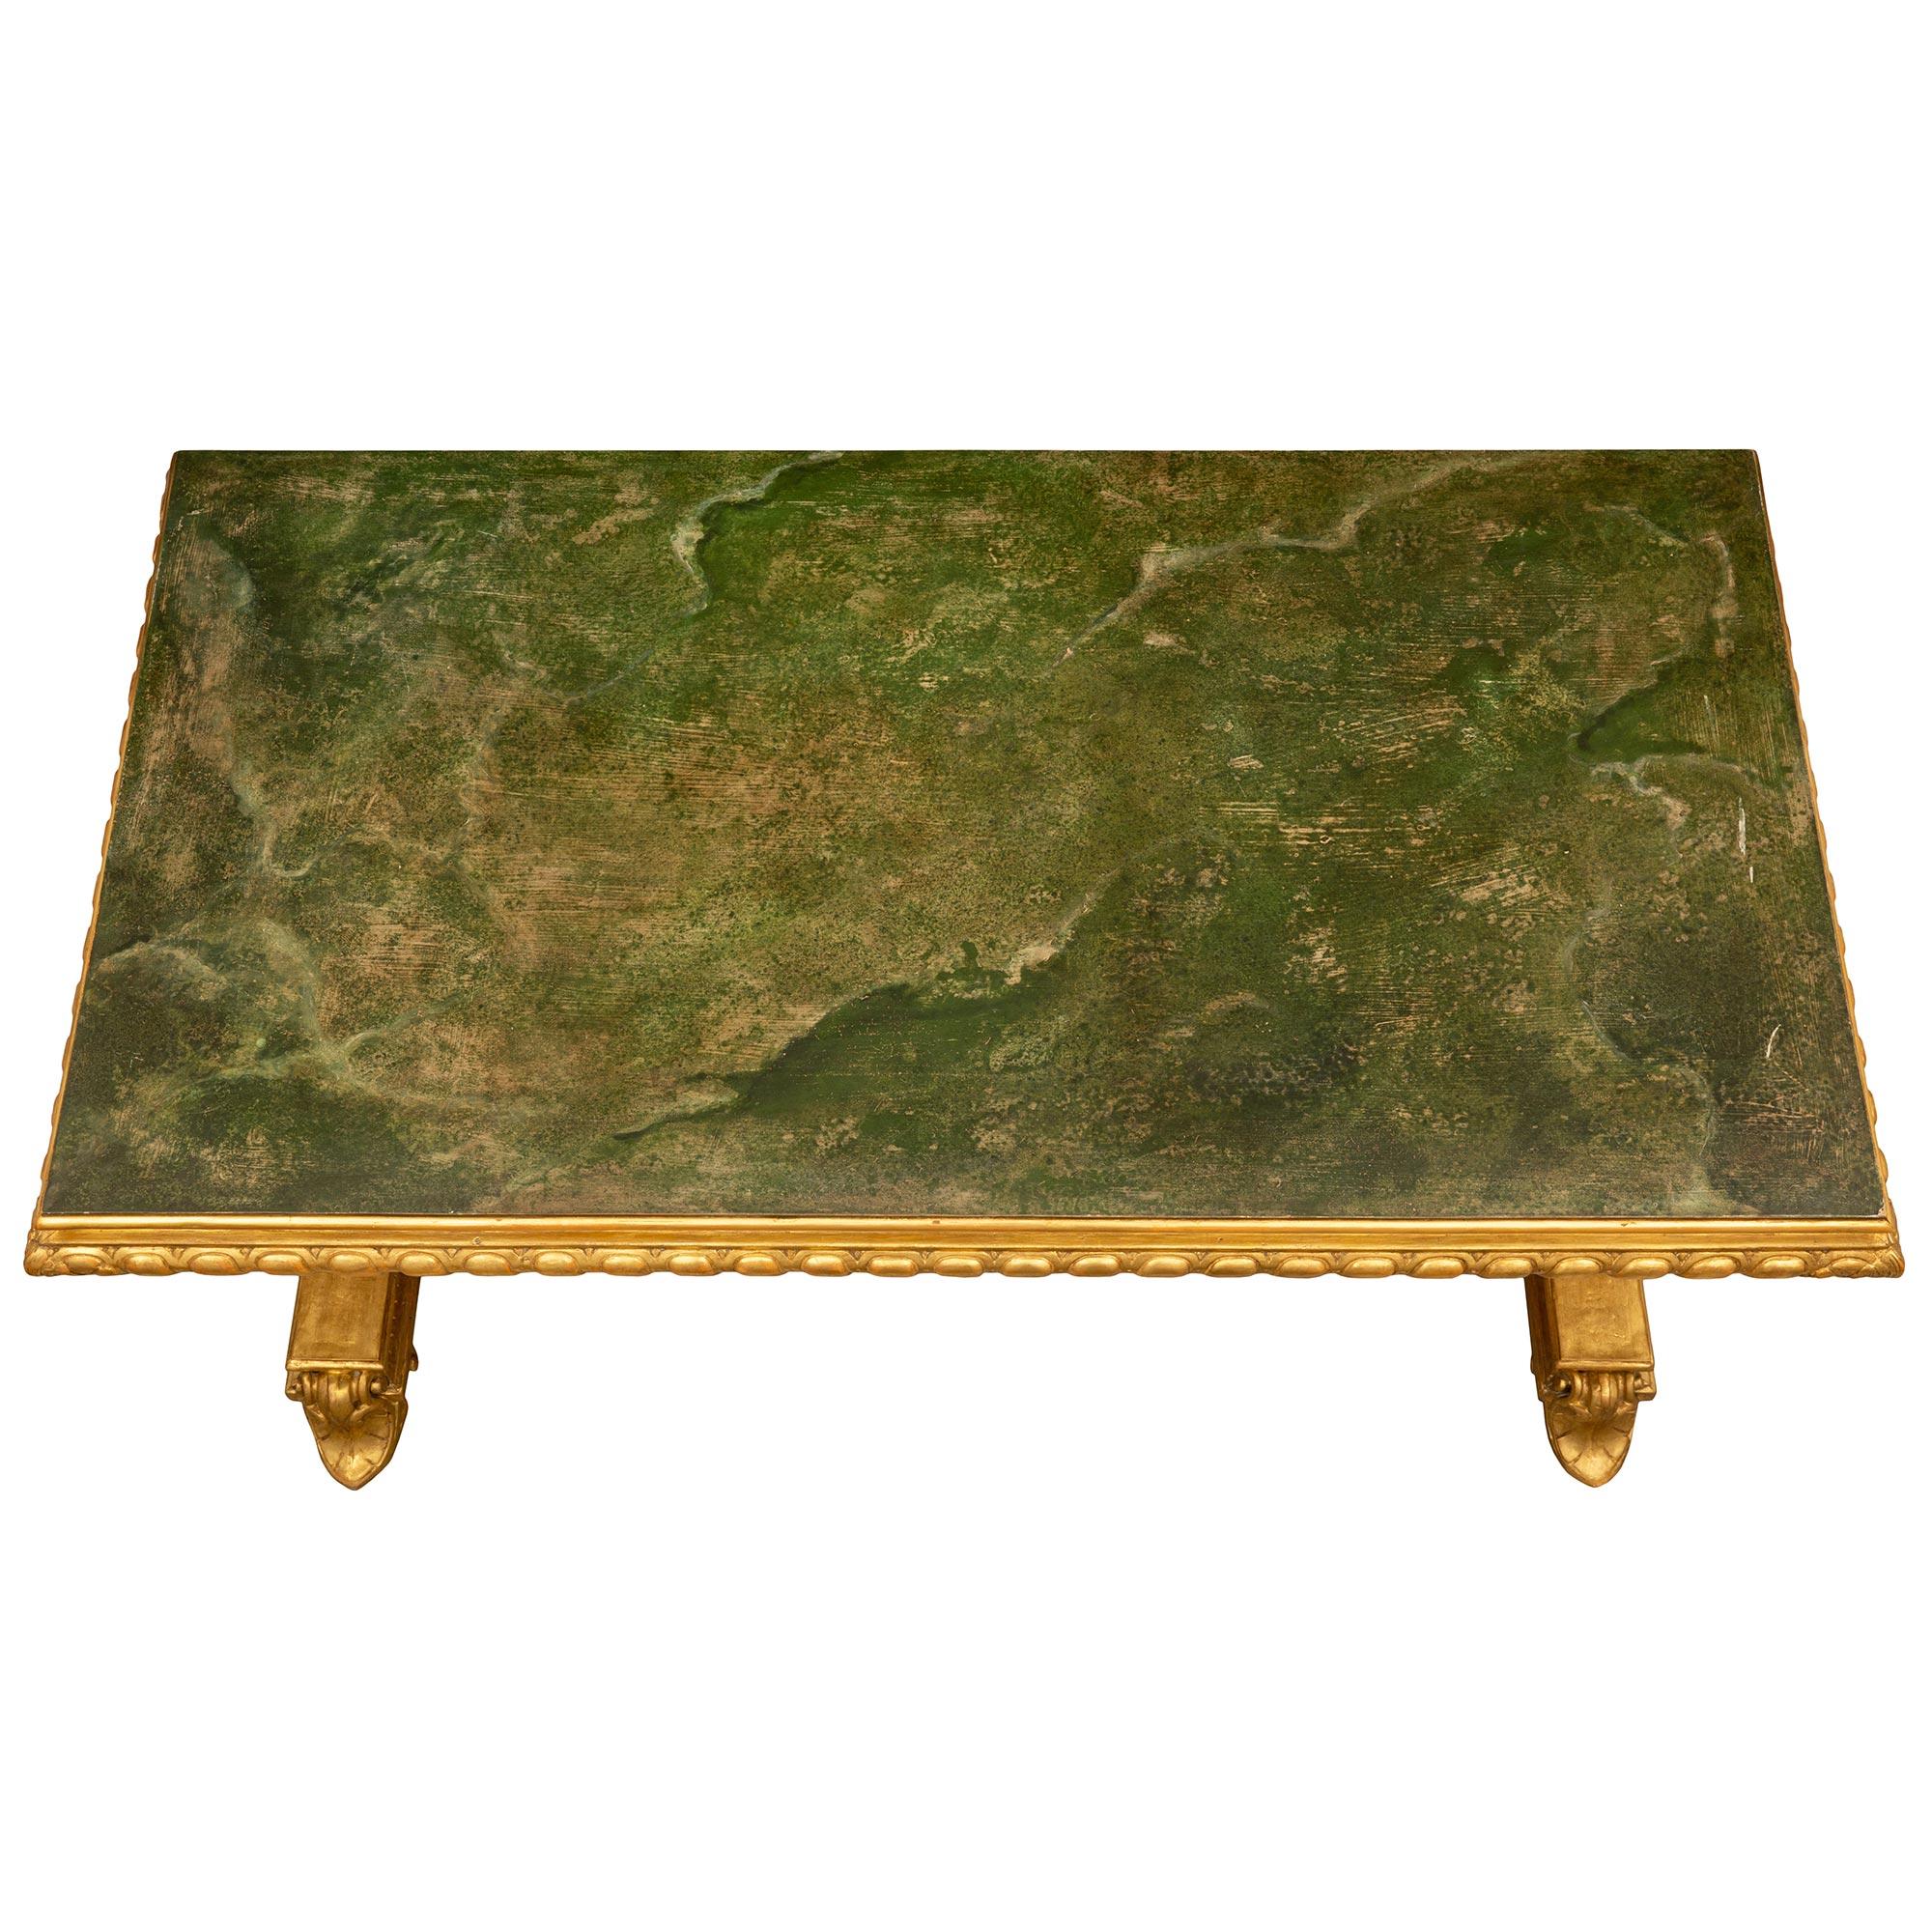 An impressive and most handsome Italian 19th century Renaissance st. giltwood and faux painted marble center table. The rectangular table is raised by beautiful palmette designed feet below elegant mottled fluted plinths which extend along the